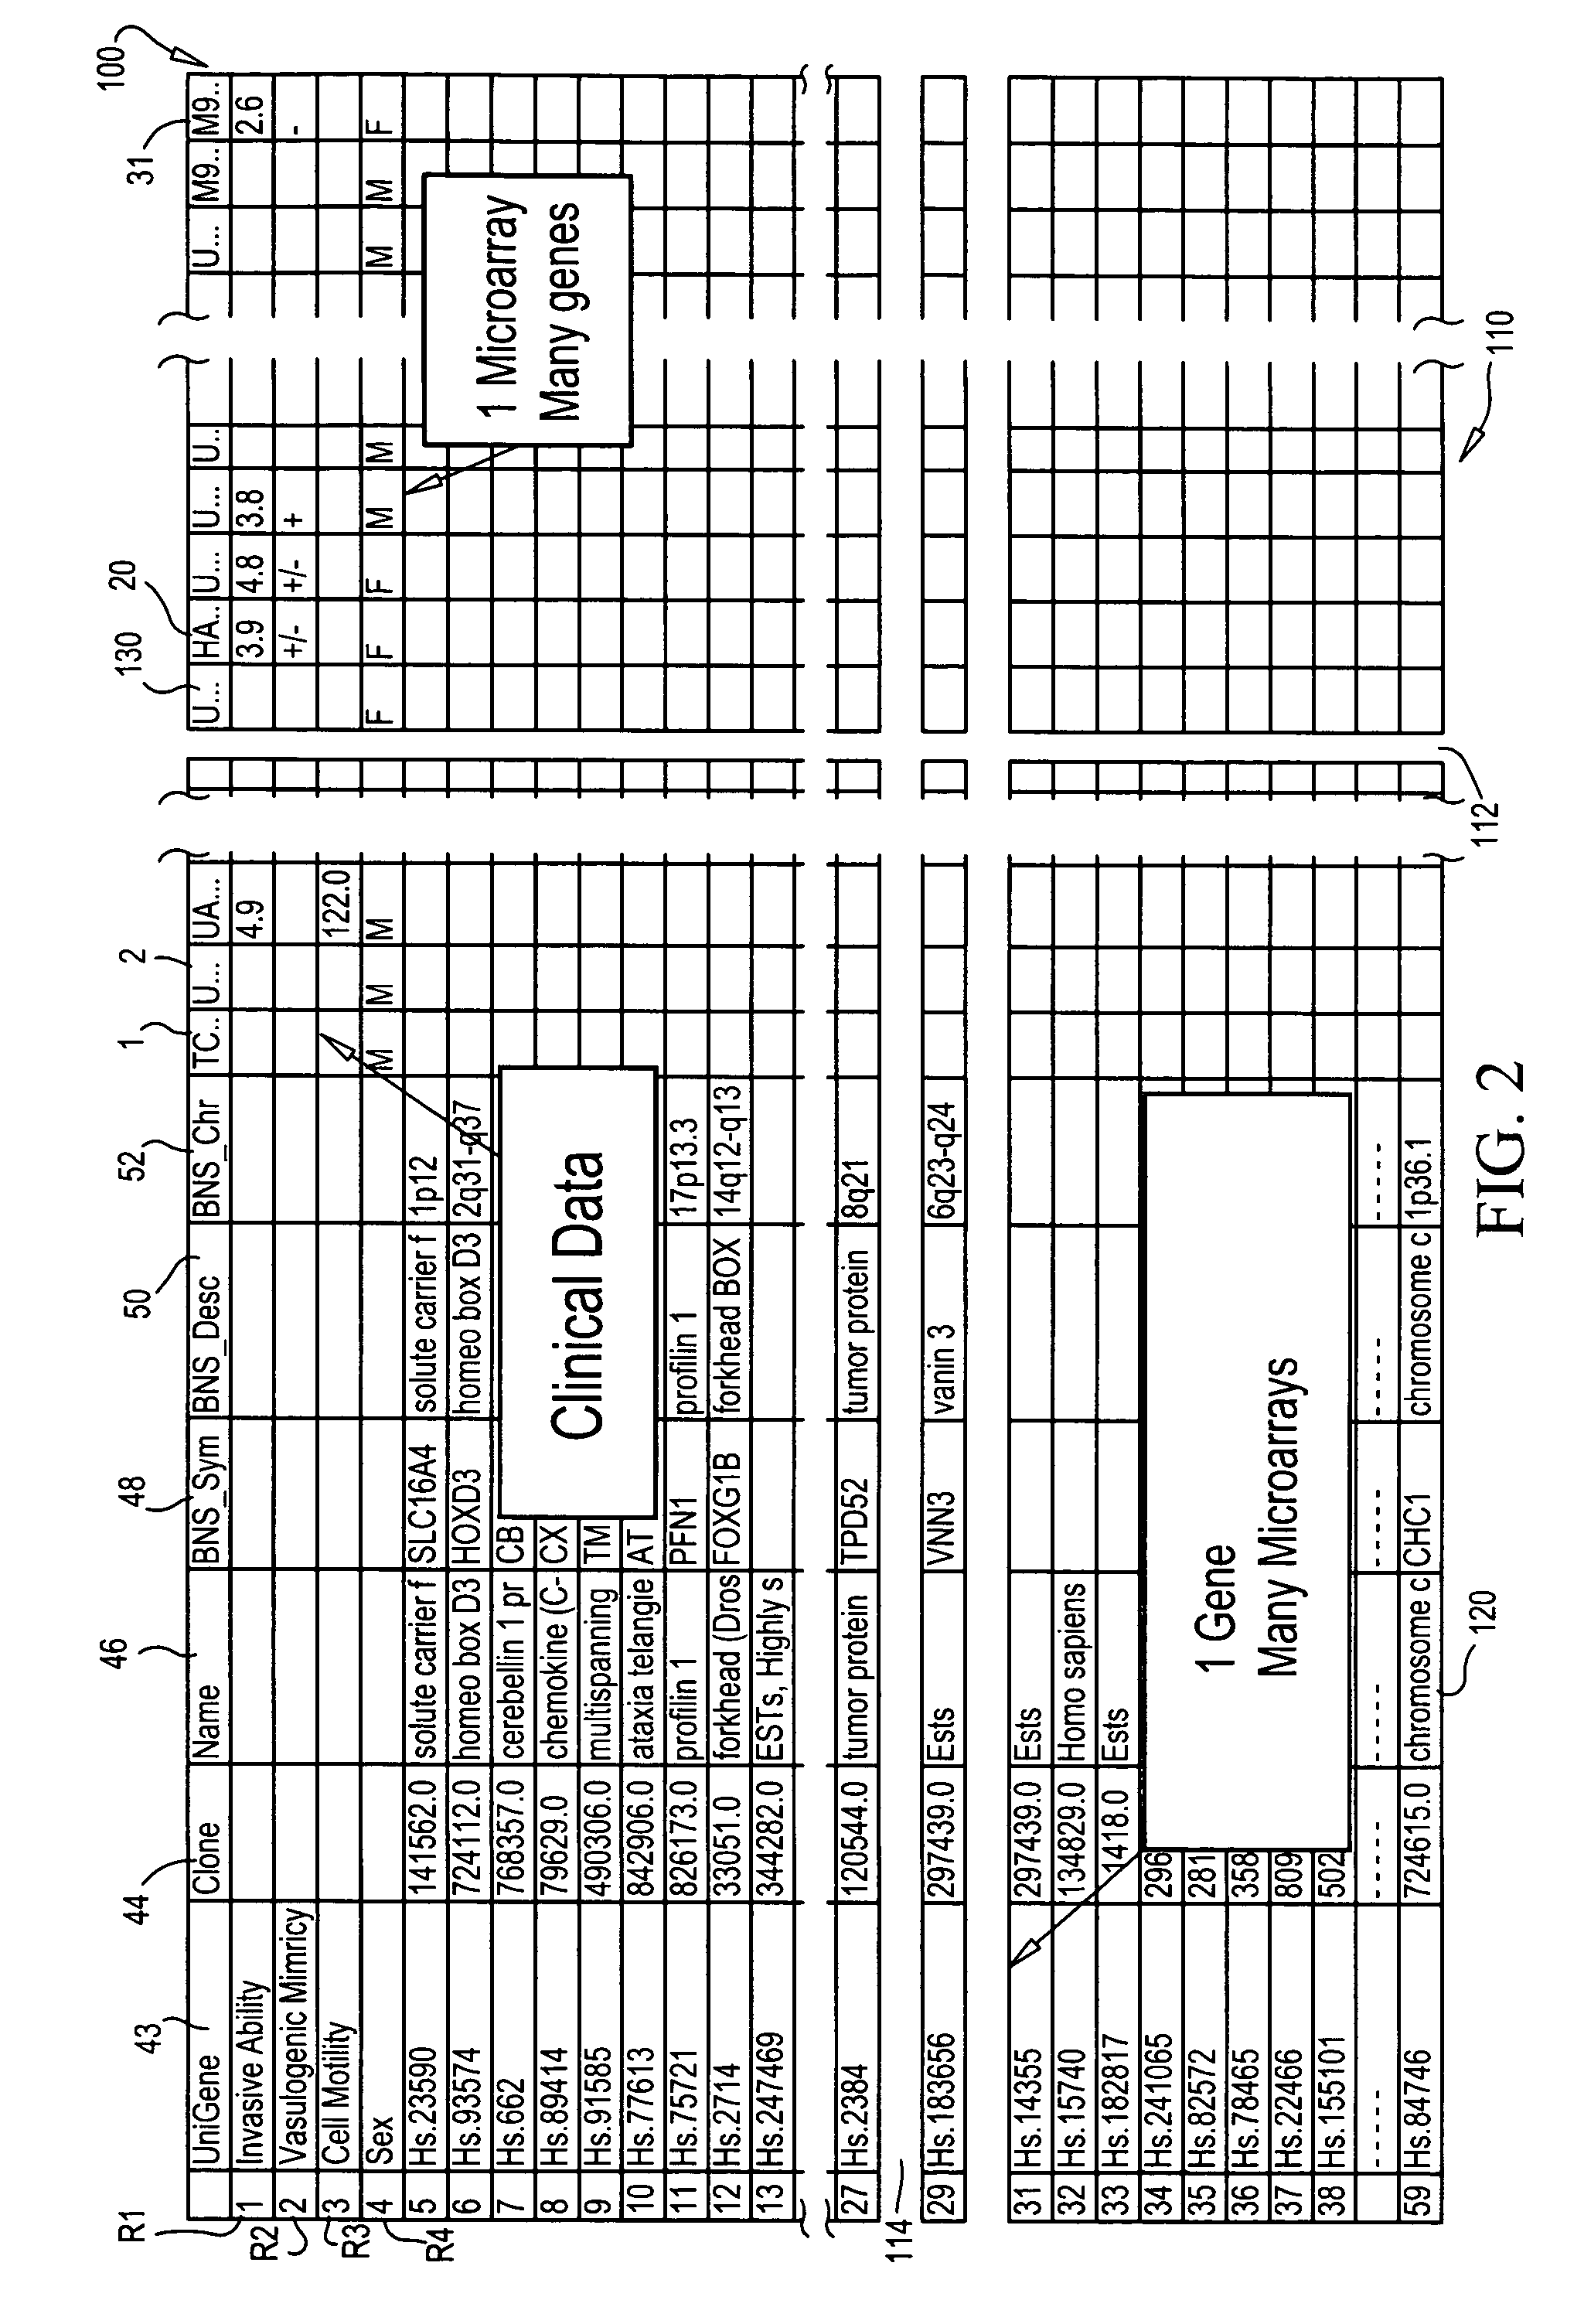 Methods and system for simultaneous visualization and manipulation of multiple data types